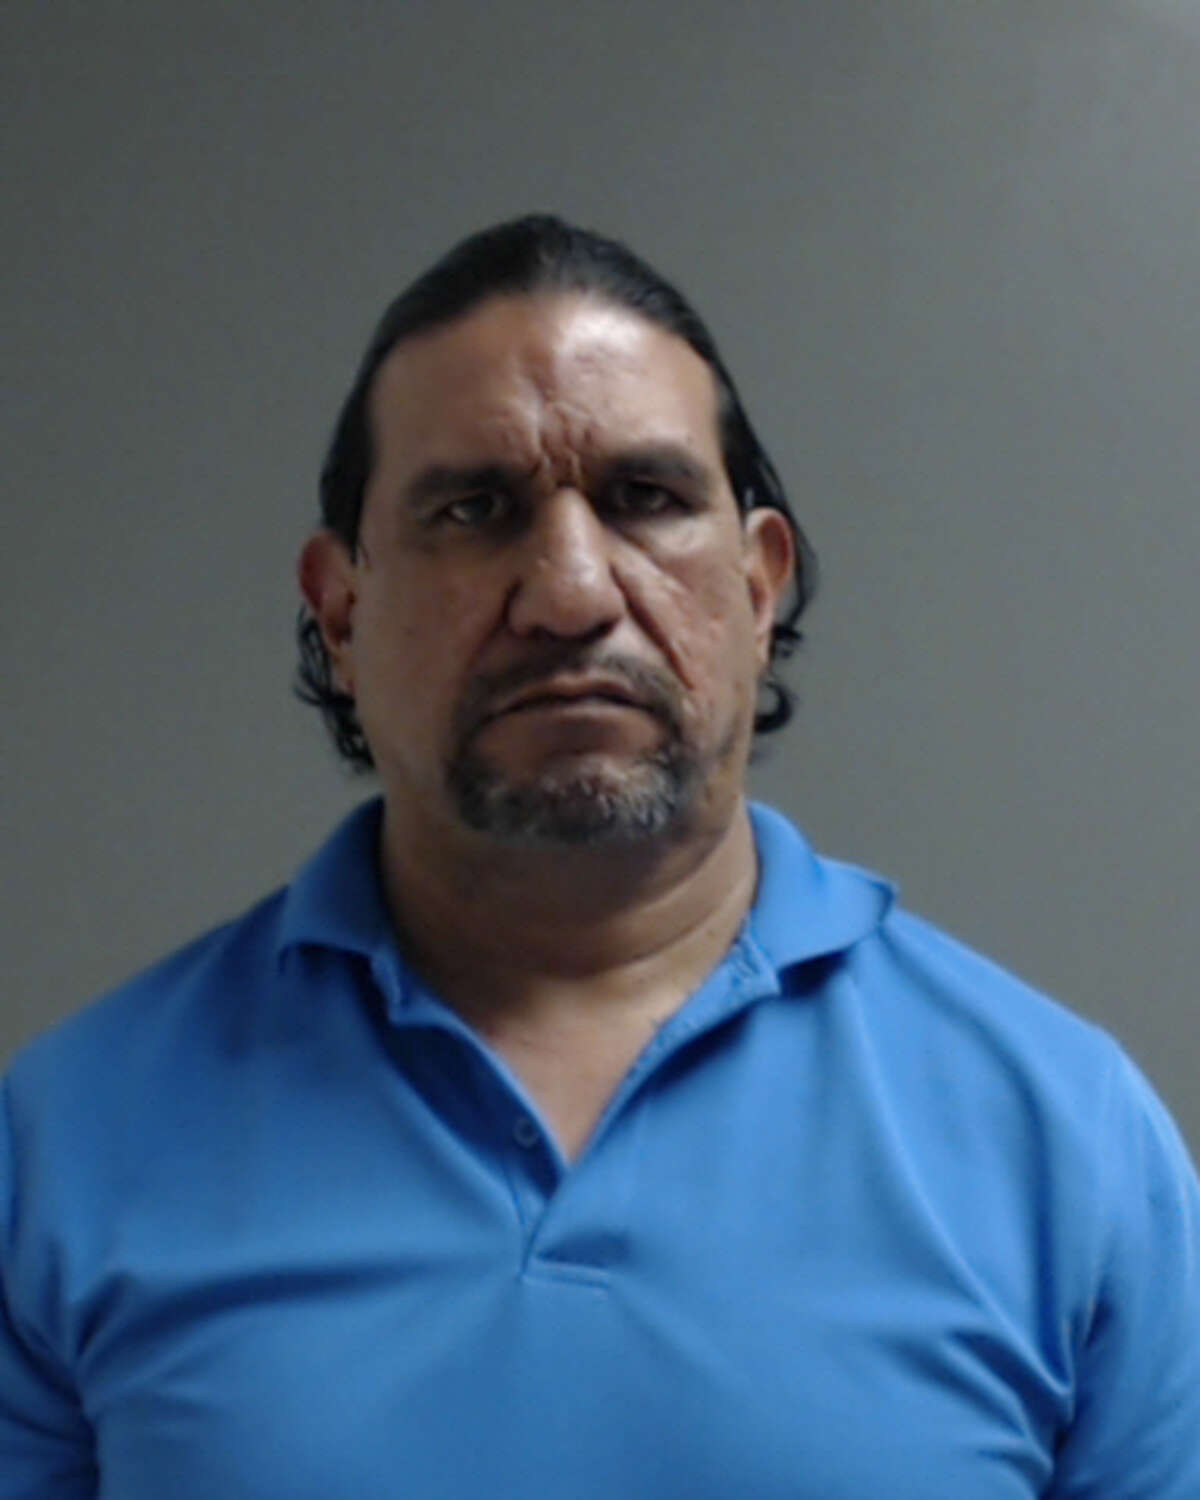 Juan Carlos Garcia, Sr., 50, was arrested Jan. 11, 2017, on a charge of continuous sexual assault of a child under 14. He and his son, who also faces charges in the sexual assault of 14-year-old twins, bailed out of jail two days later on Jan. 13, 2017.